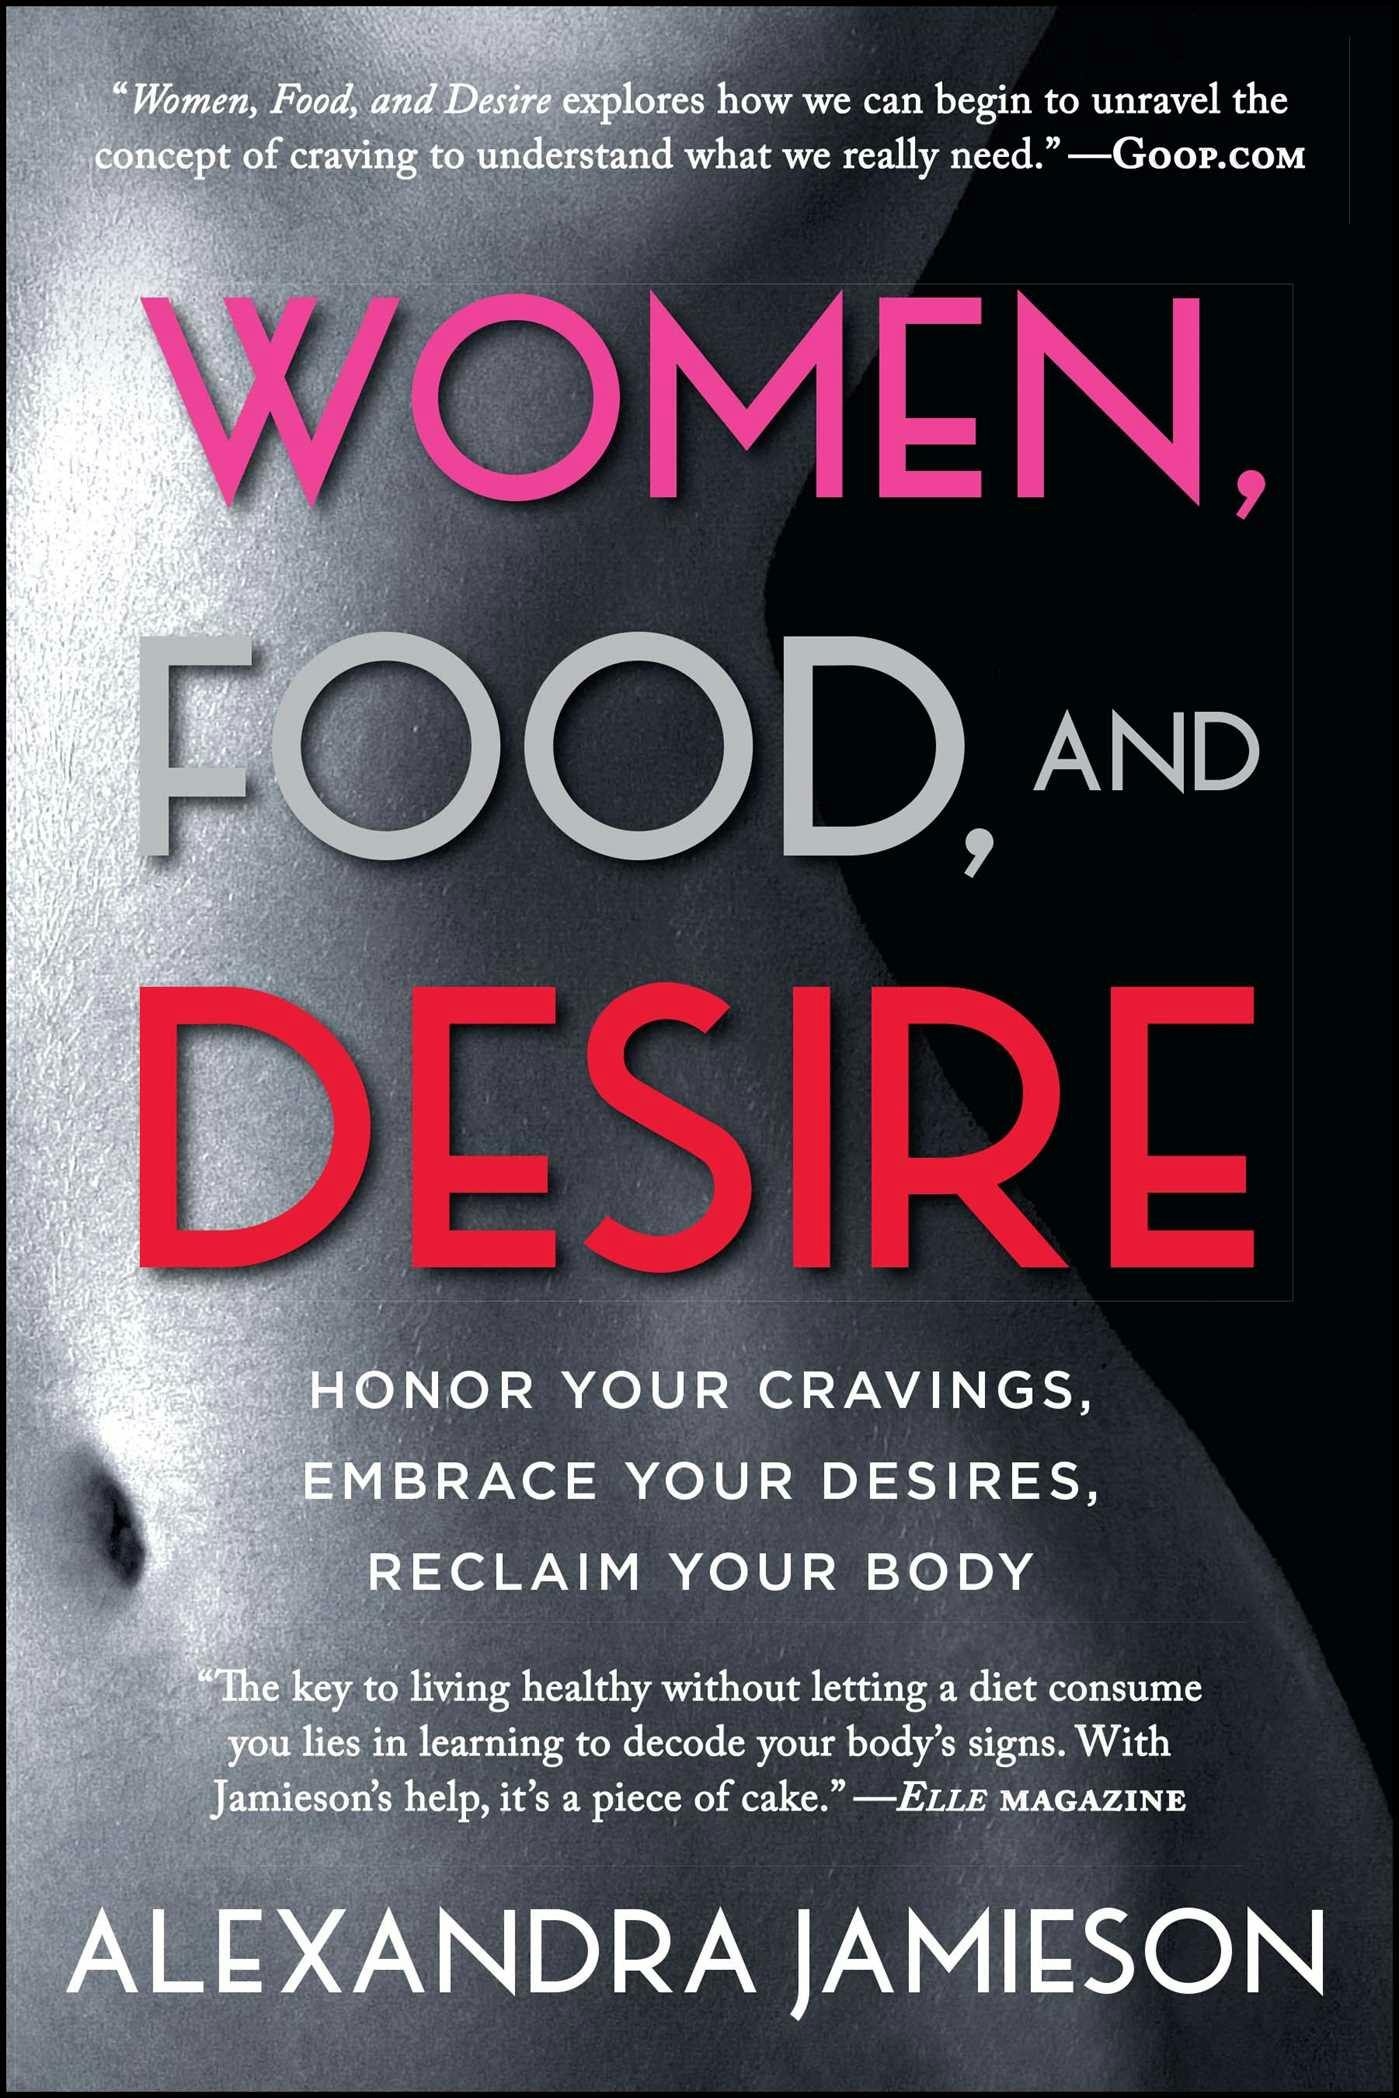 Women, Food, and Desire: Embrace Your Cravings, Make Peace with Food, Reclaim Your Body - Alexandra Jamieson